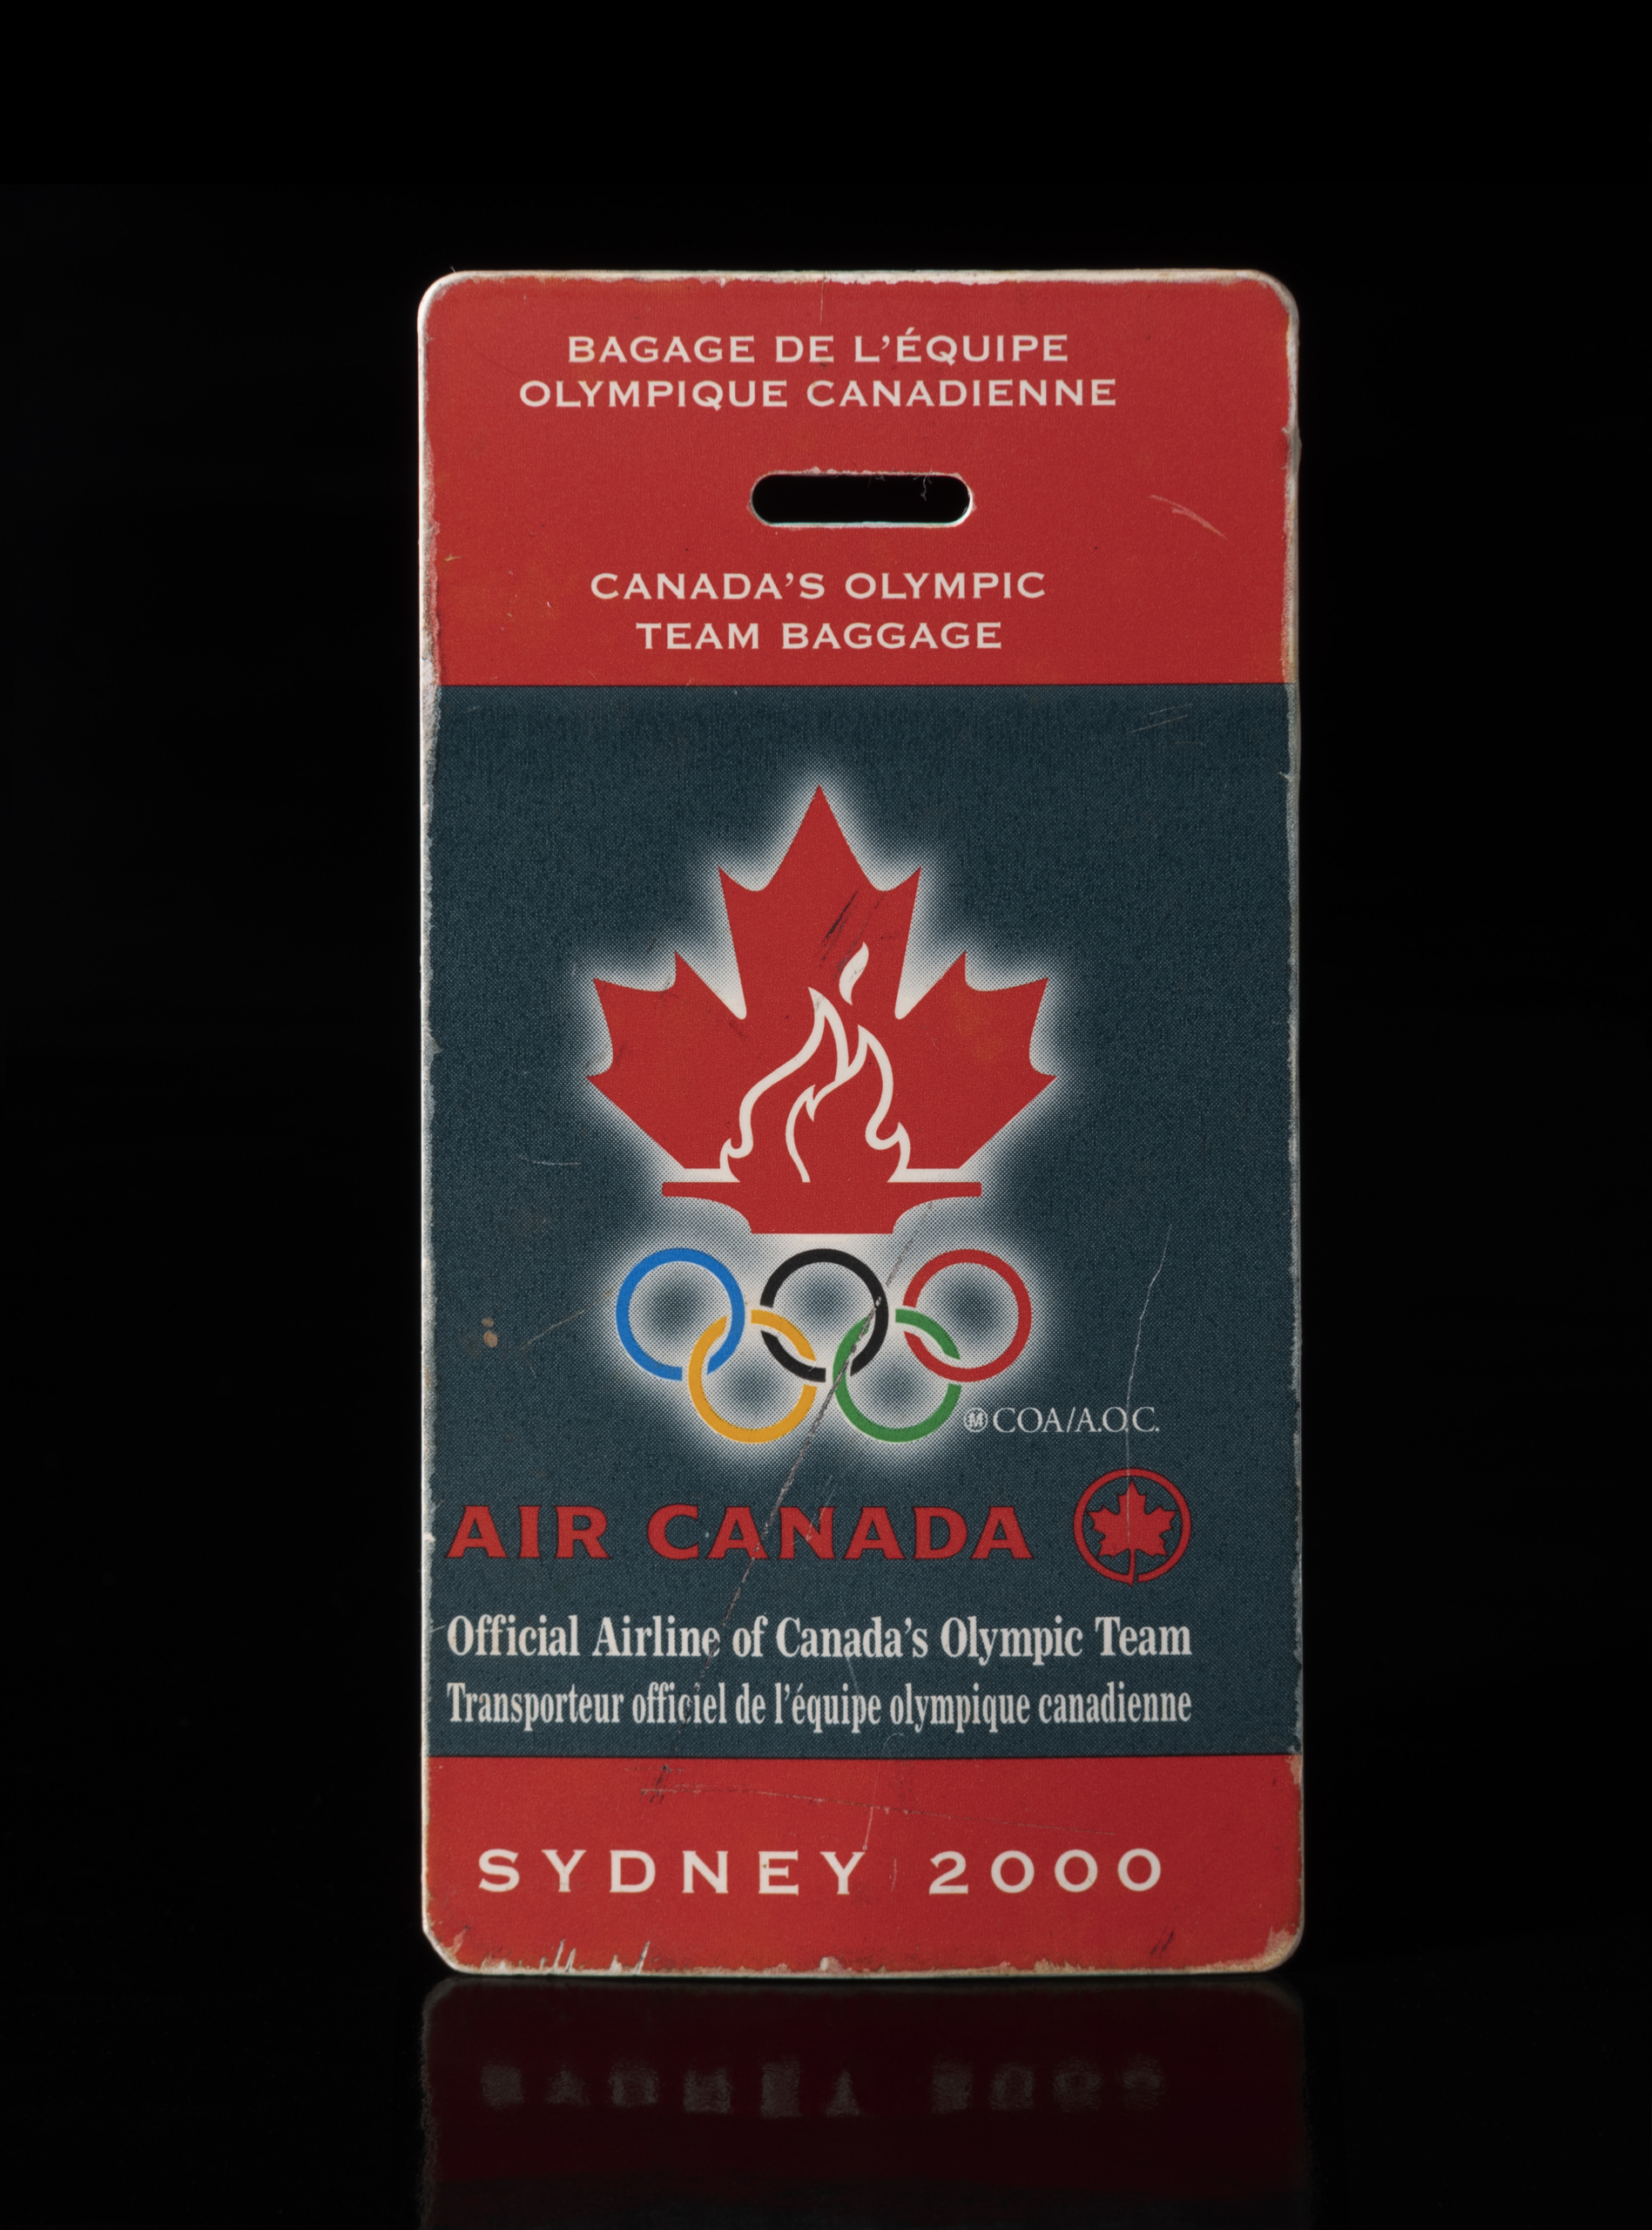 Rectangular blue and red tag with a red maple leaf and Olympic rings